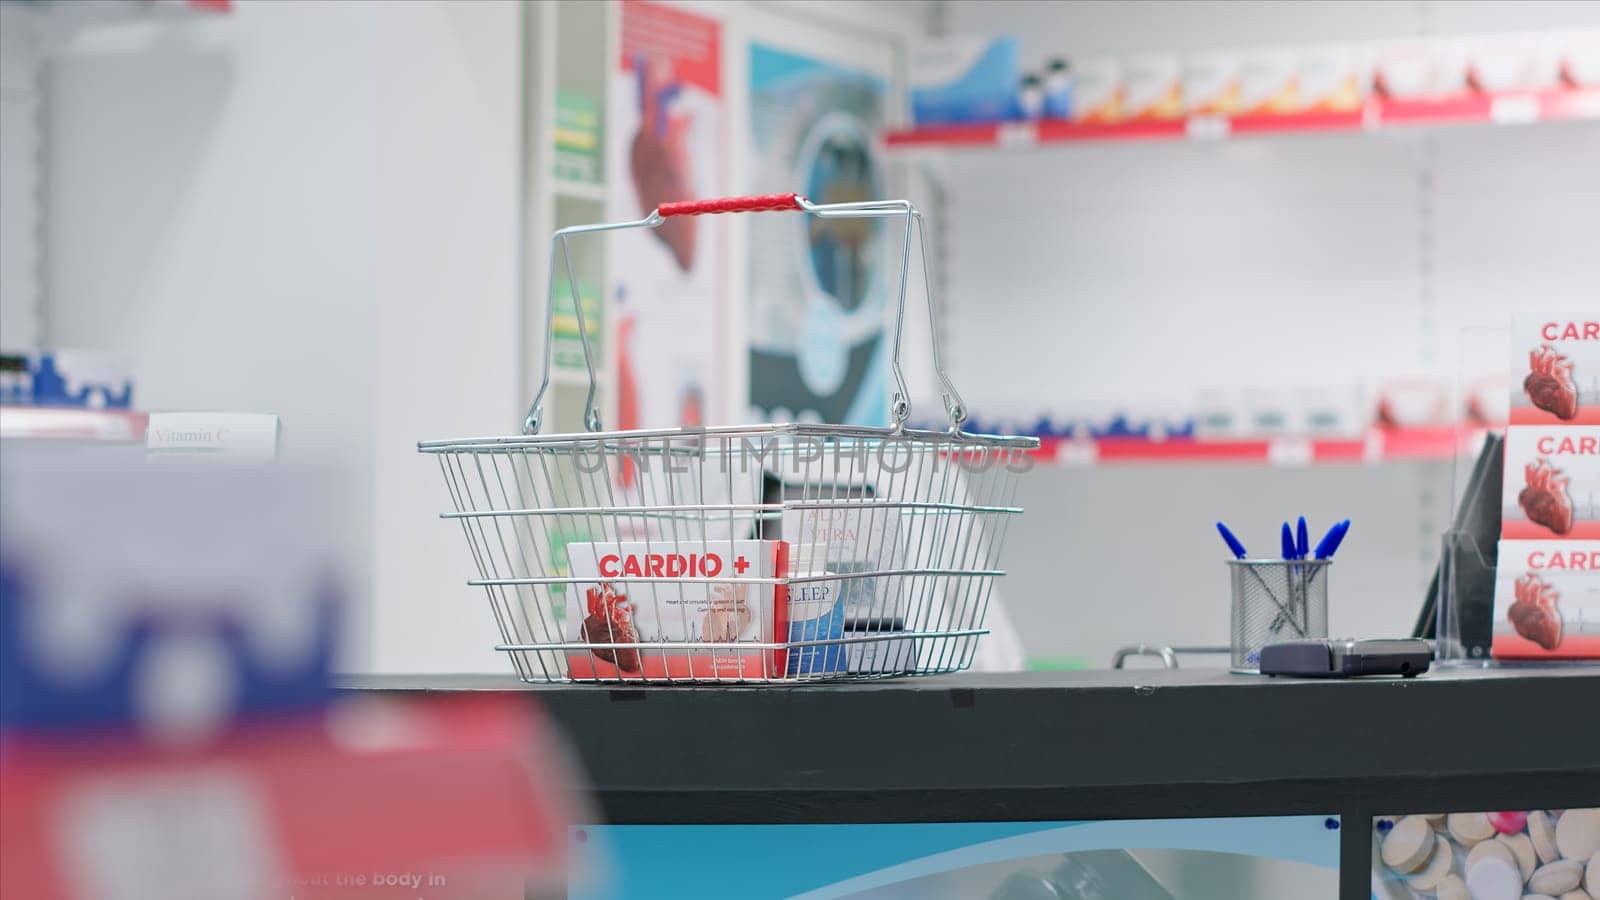 Empty pharmacy checkout counter with boxes of medicine, selling modern pills or pharmaceutical drugs on shelves in drugstore clinic. Medical supplies are for sale along with other treatments.